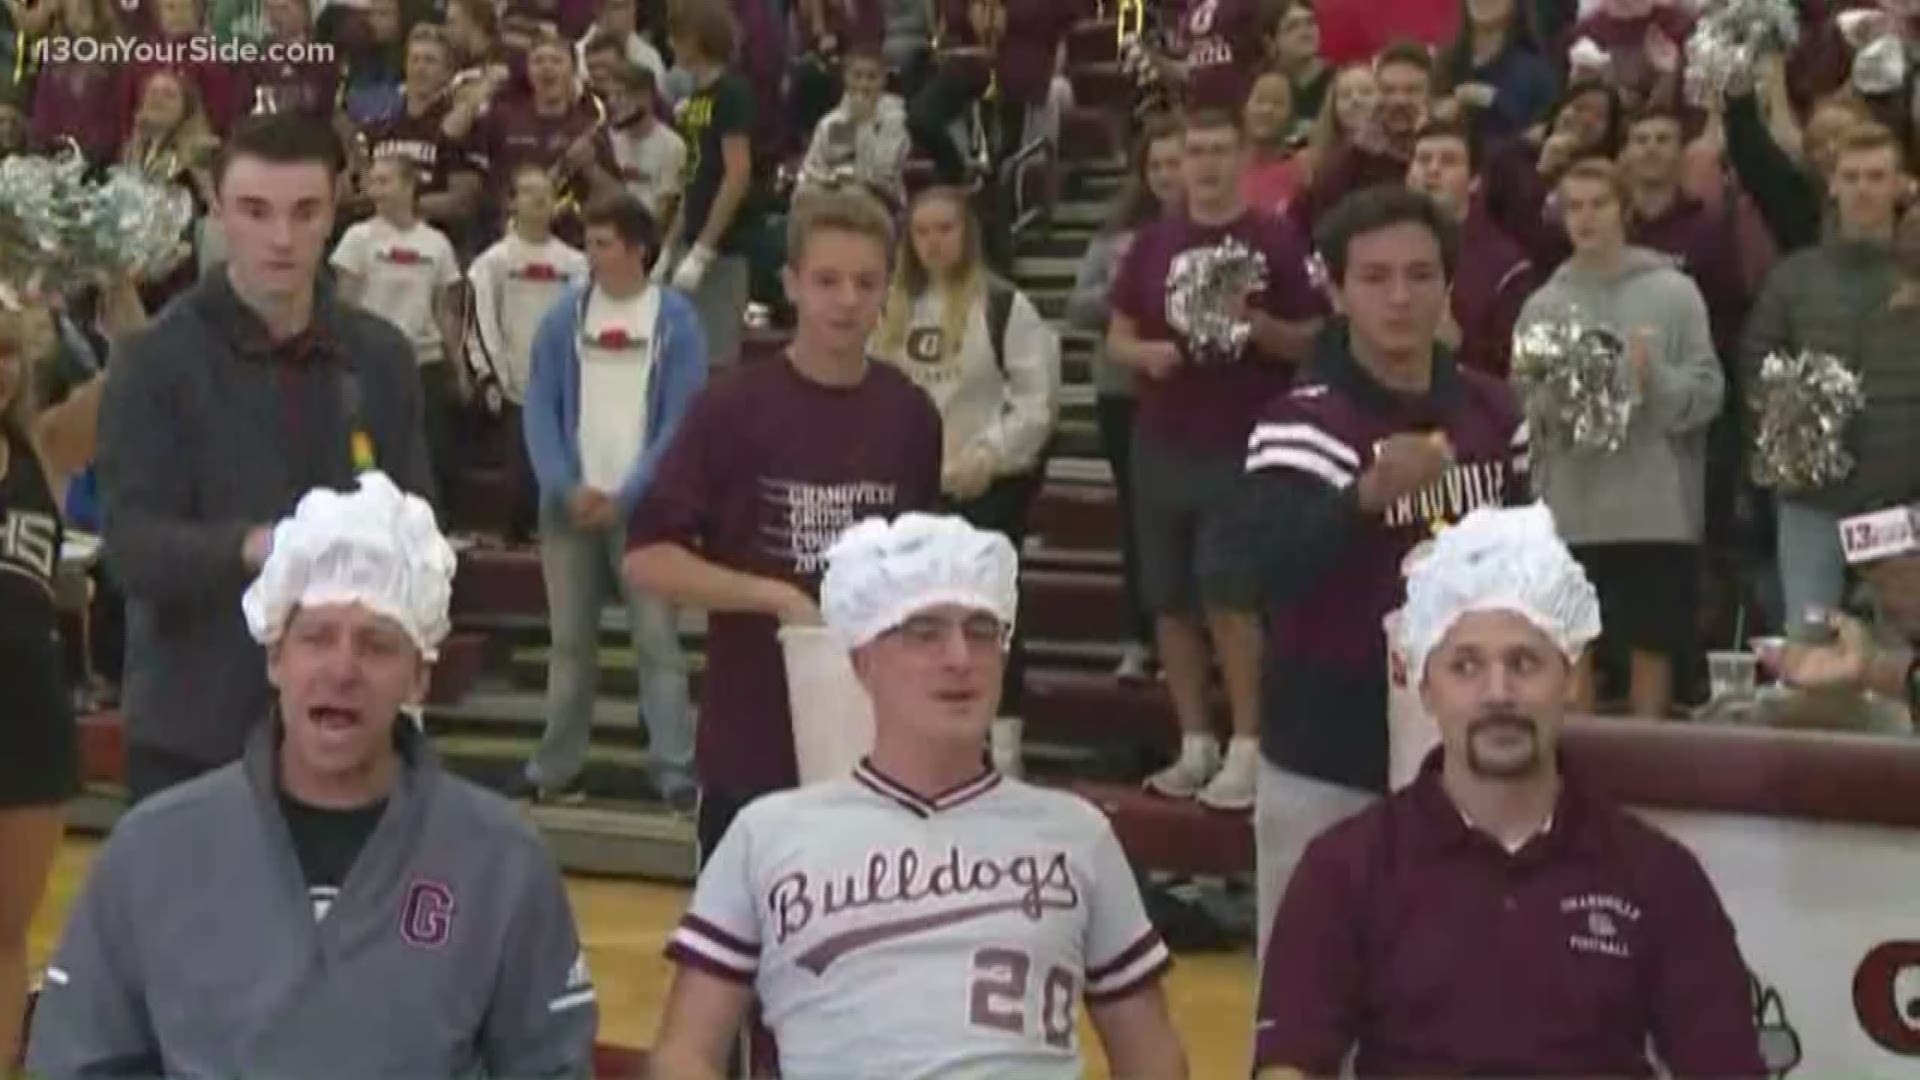 The Bulldogs sit down a couple teachers and staff members for a messy, cheese puff game.